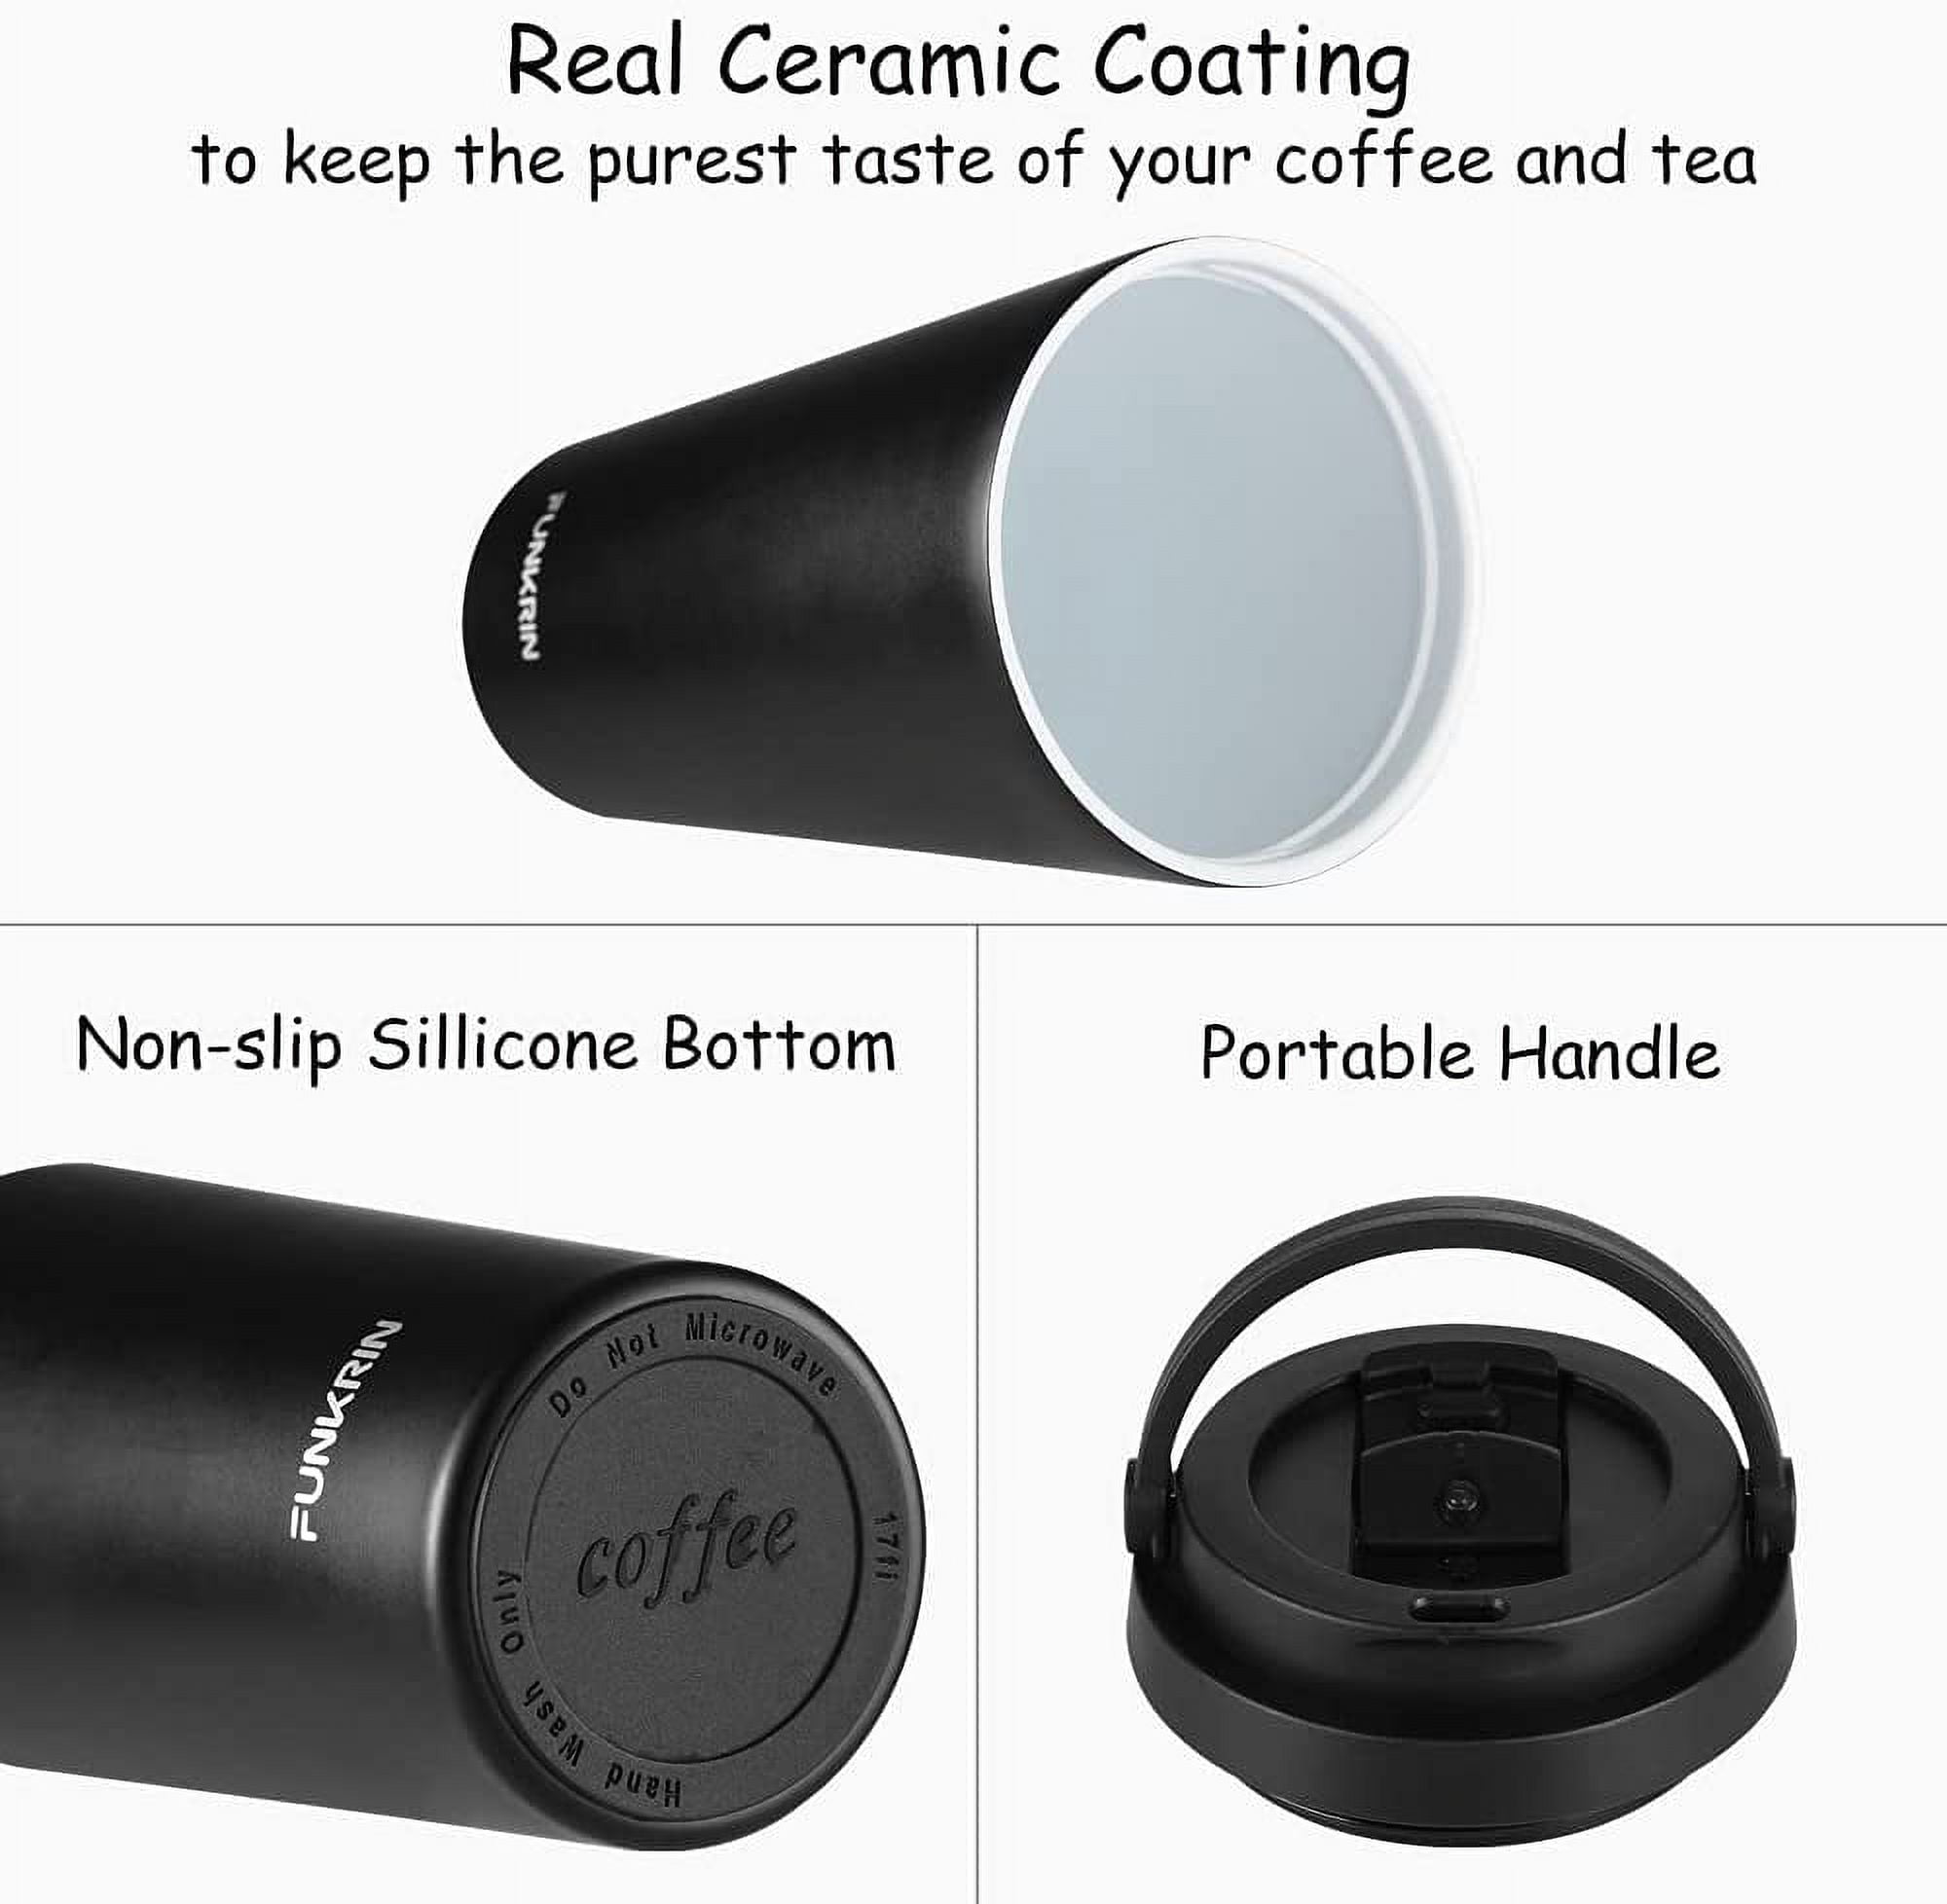 Funkrin Insulated Coffee Mug with Ceramic Coating, 16oz Iced Coffee Tumbler  Cup with Flip Lid and Ha…See more Funkrin Insulated Coffee Mug with